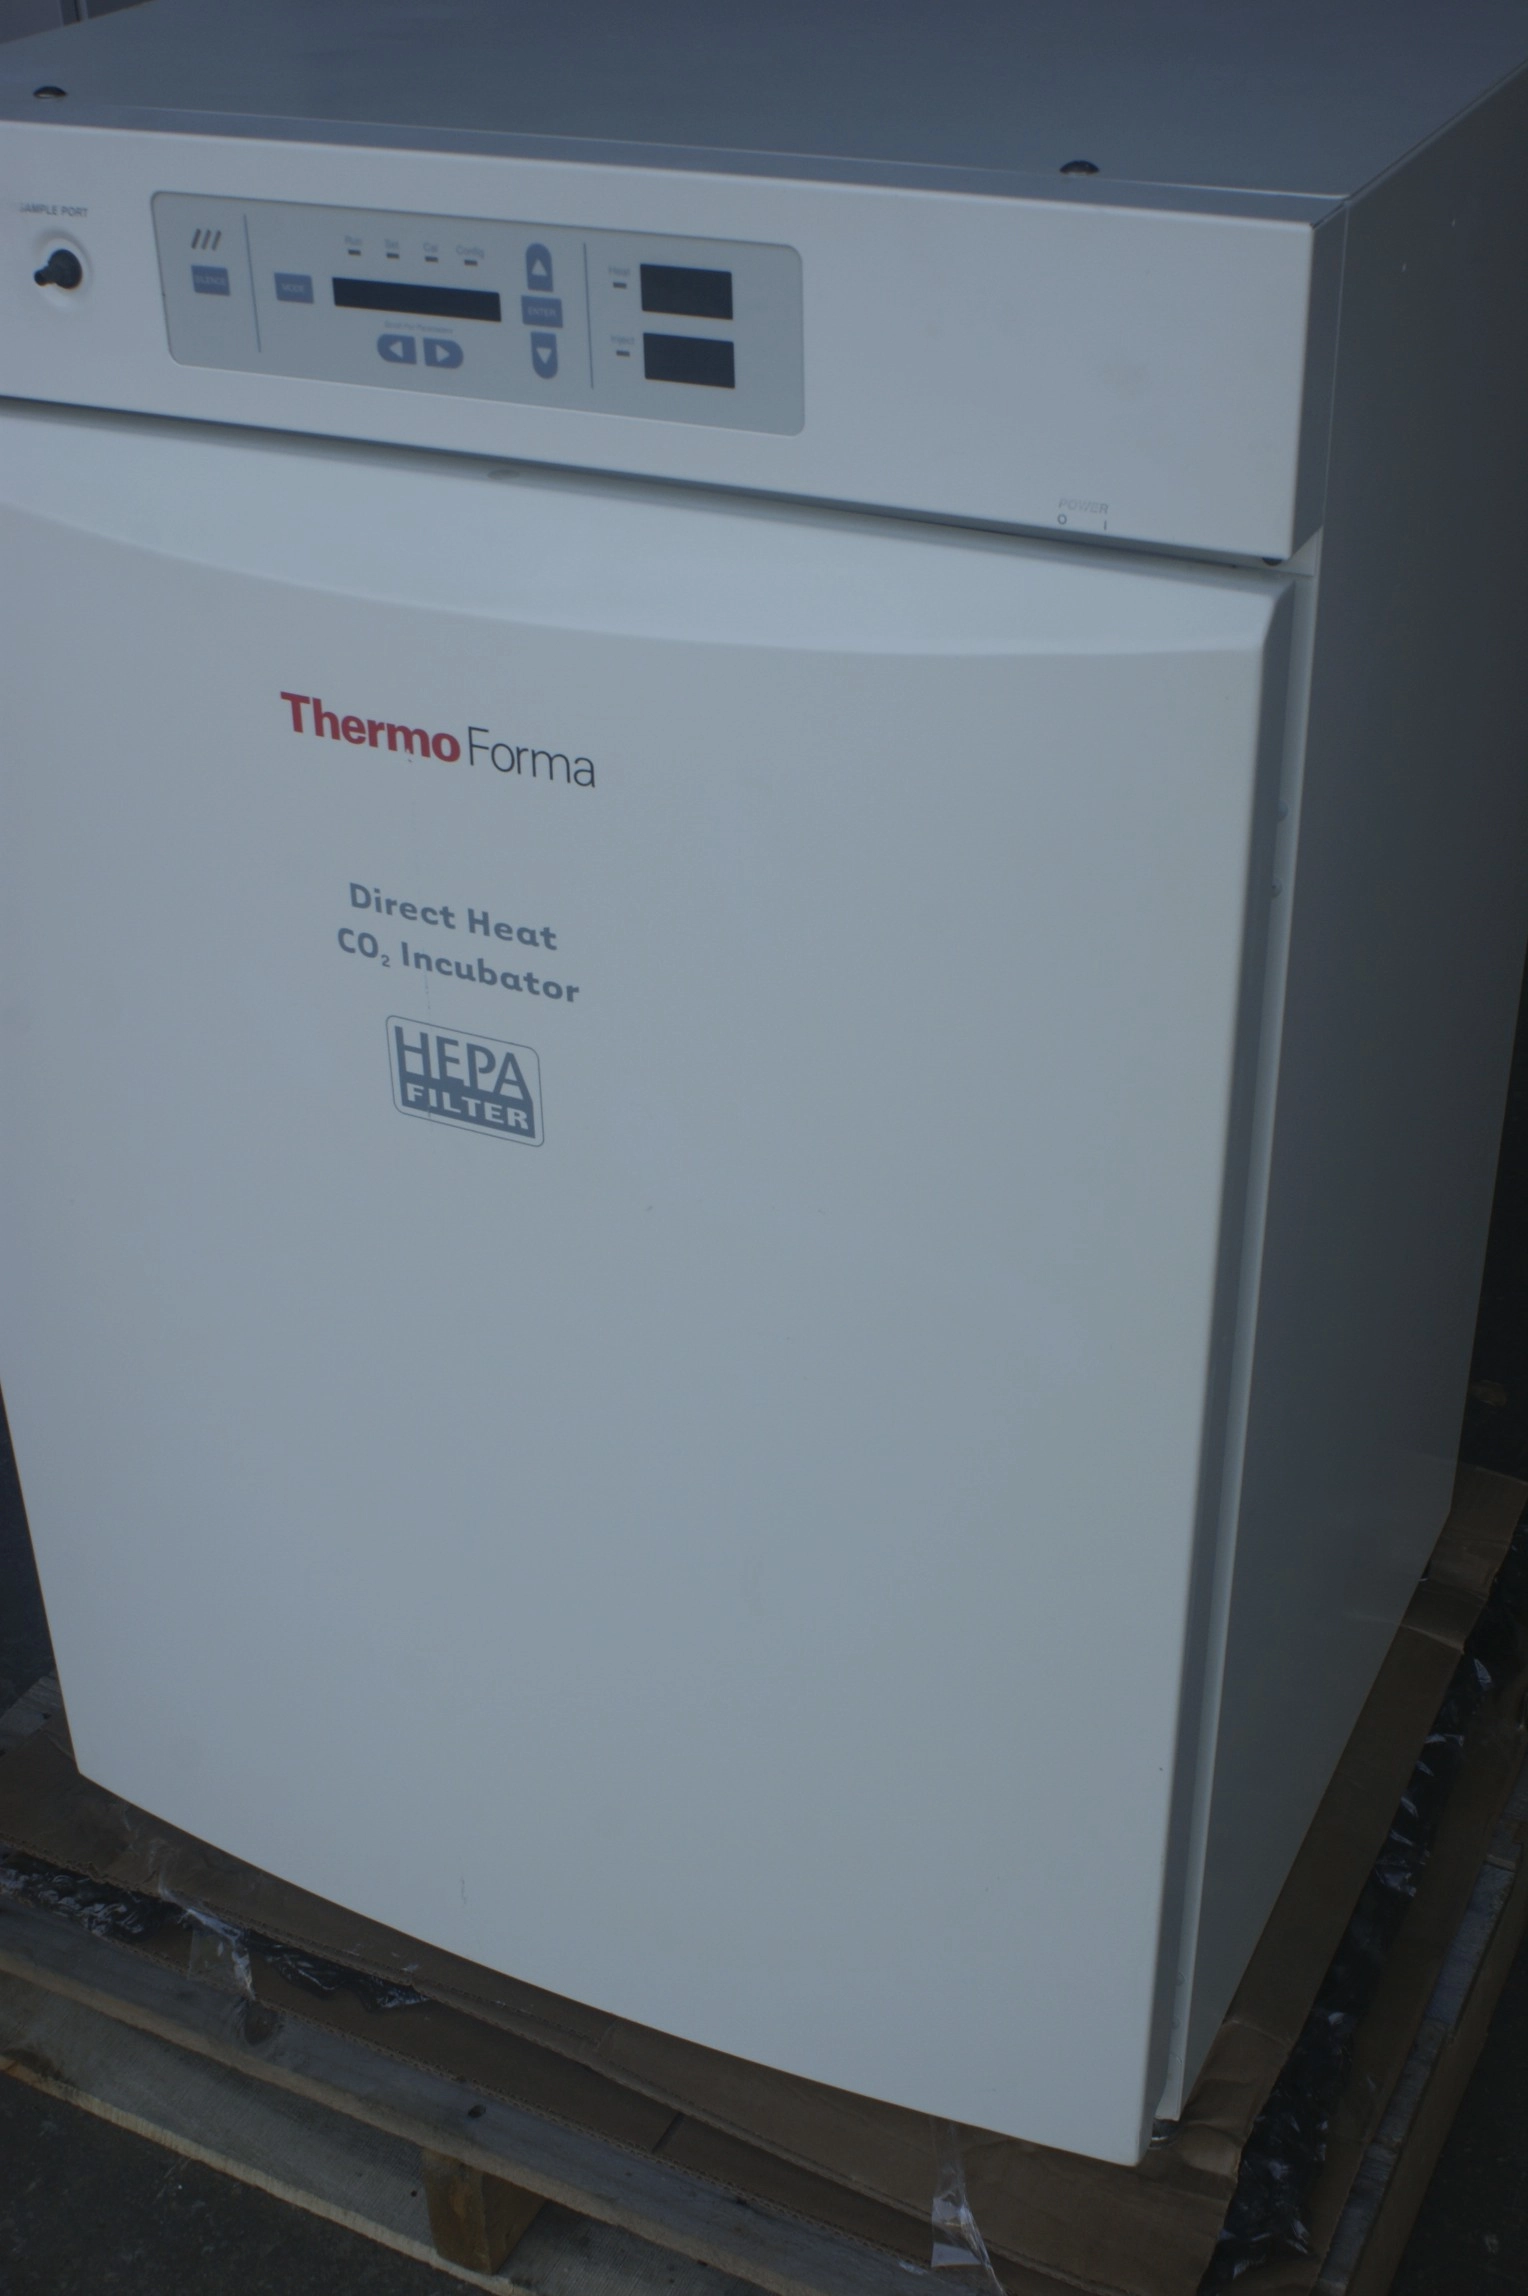 Thermo Forma 310 Thermo 310 Thermo Forma Direct Heat CO2 Incubator Model 310 used